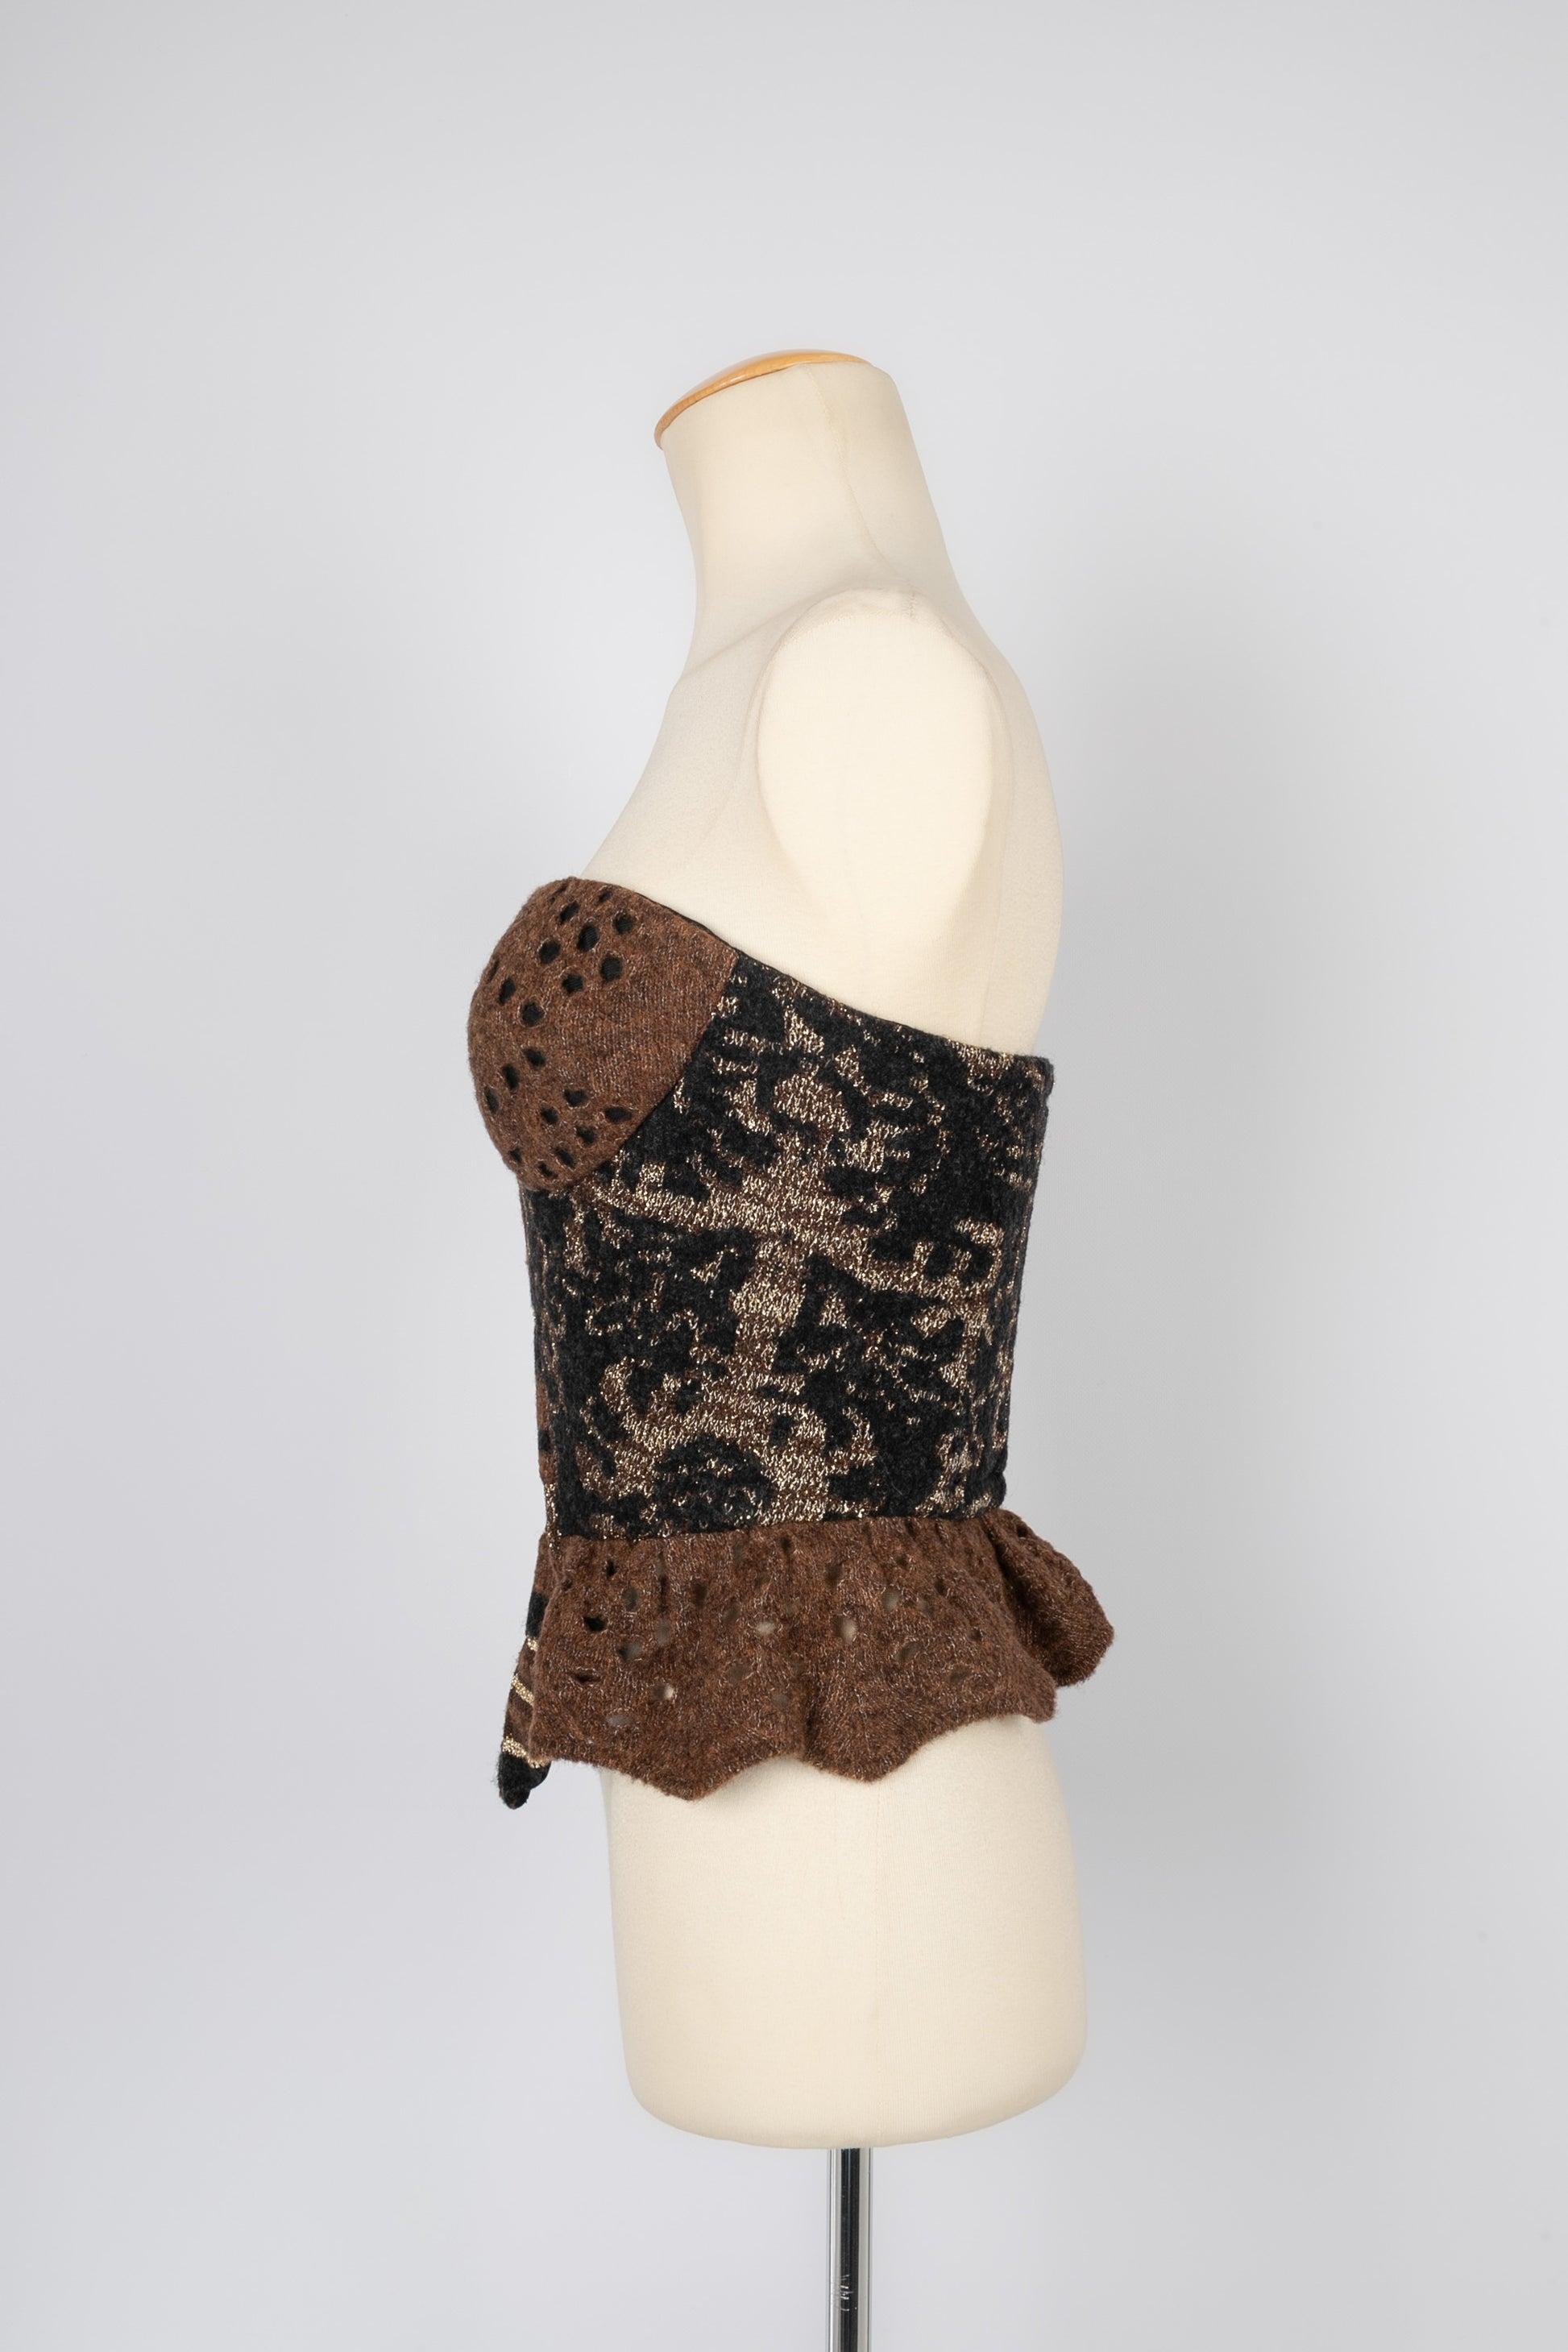 Christian Lacroix - (Made in France) Woolen bustier top. 1993 Fall-Winter Collection. 38FR Size.

Additional information:
Condition: Very good condition
Dimensions: Chest: 41 cm - Length: 35 cm
Period: 20th Century

Seller Reference: FH109